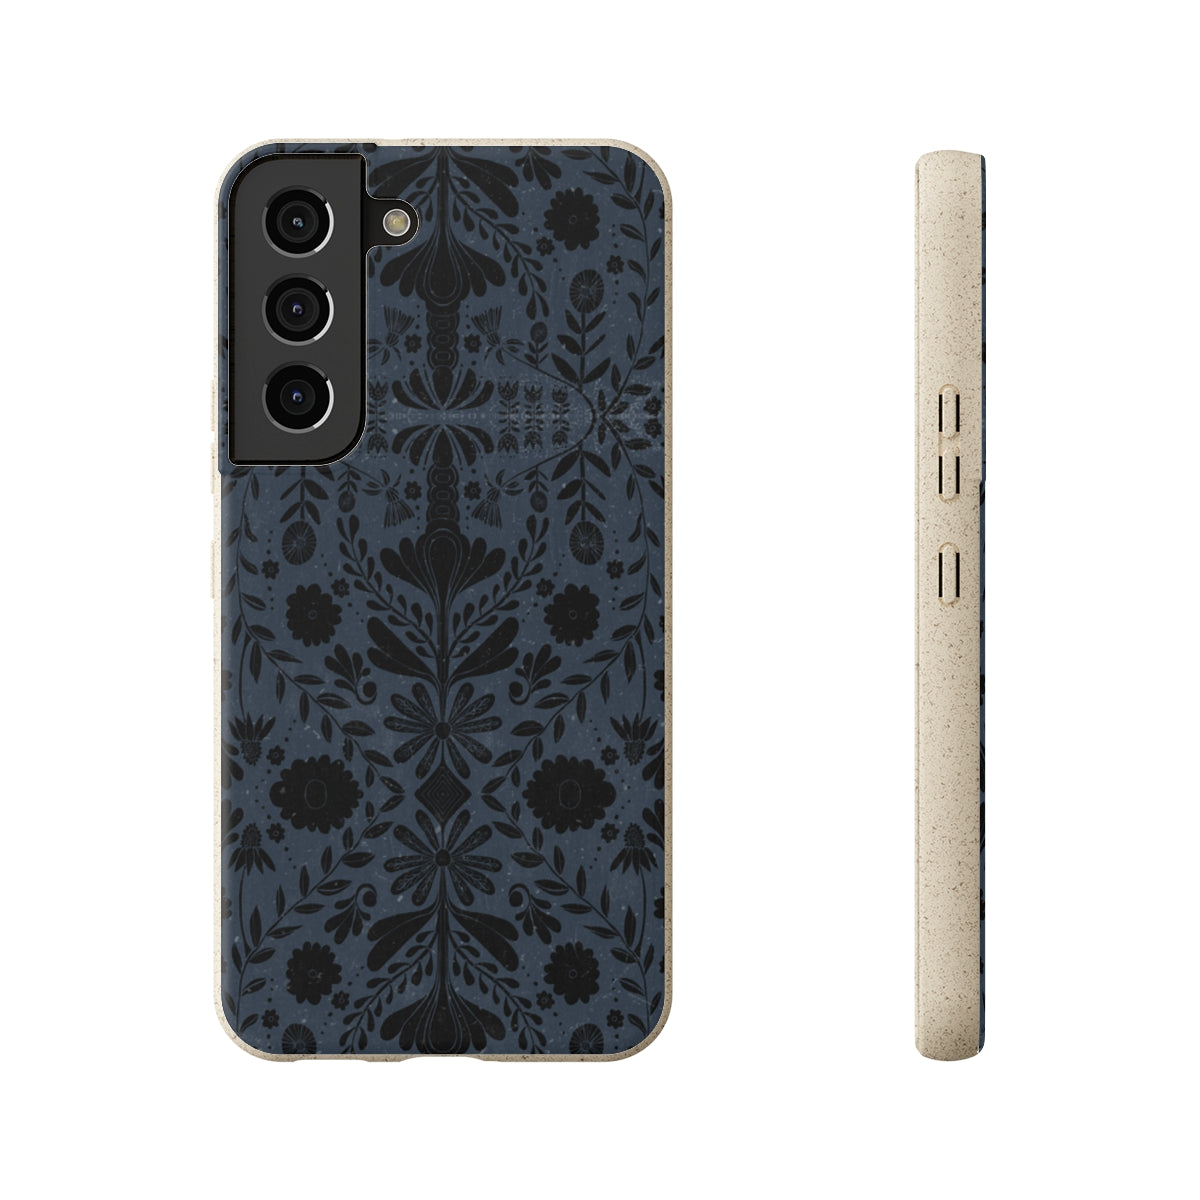 Biodegradable Cases [Night Sky]